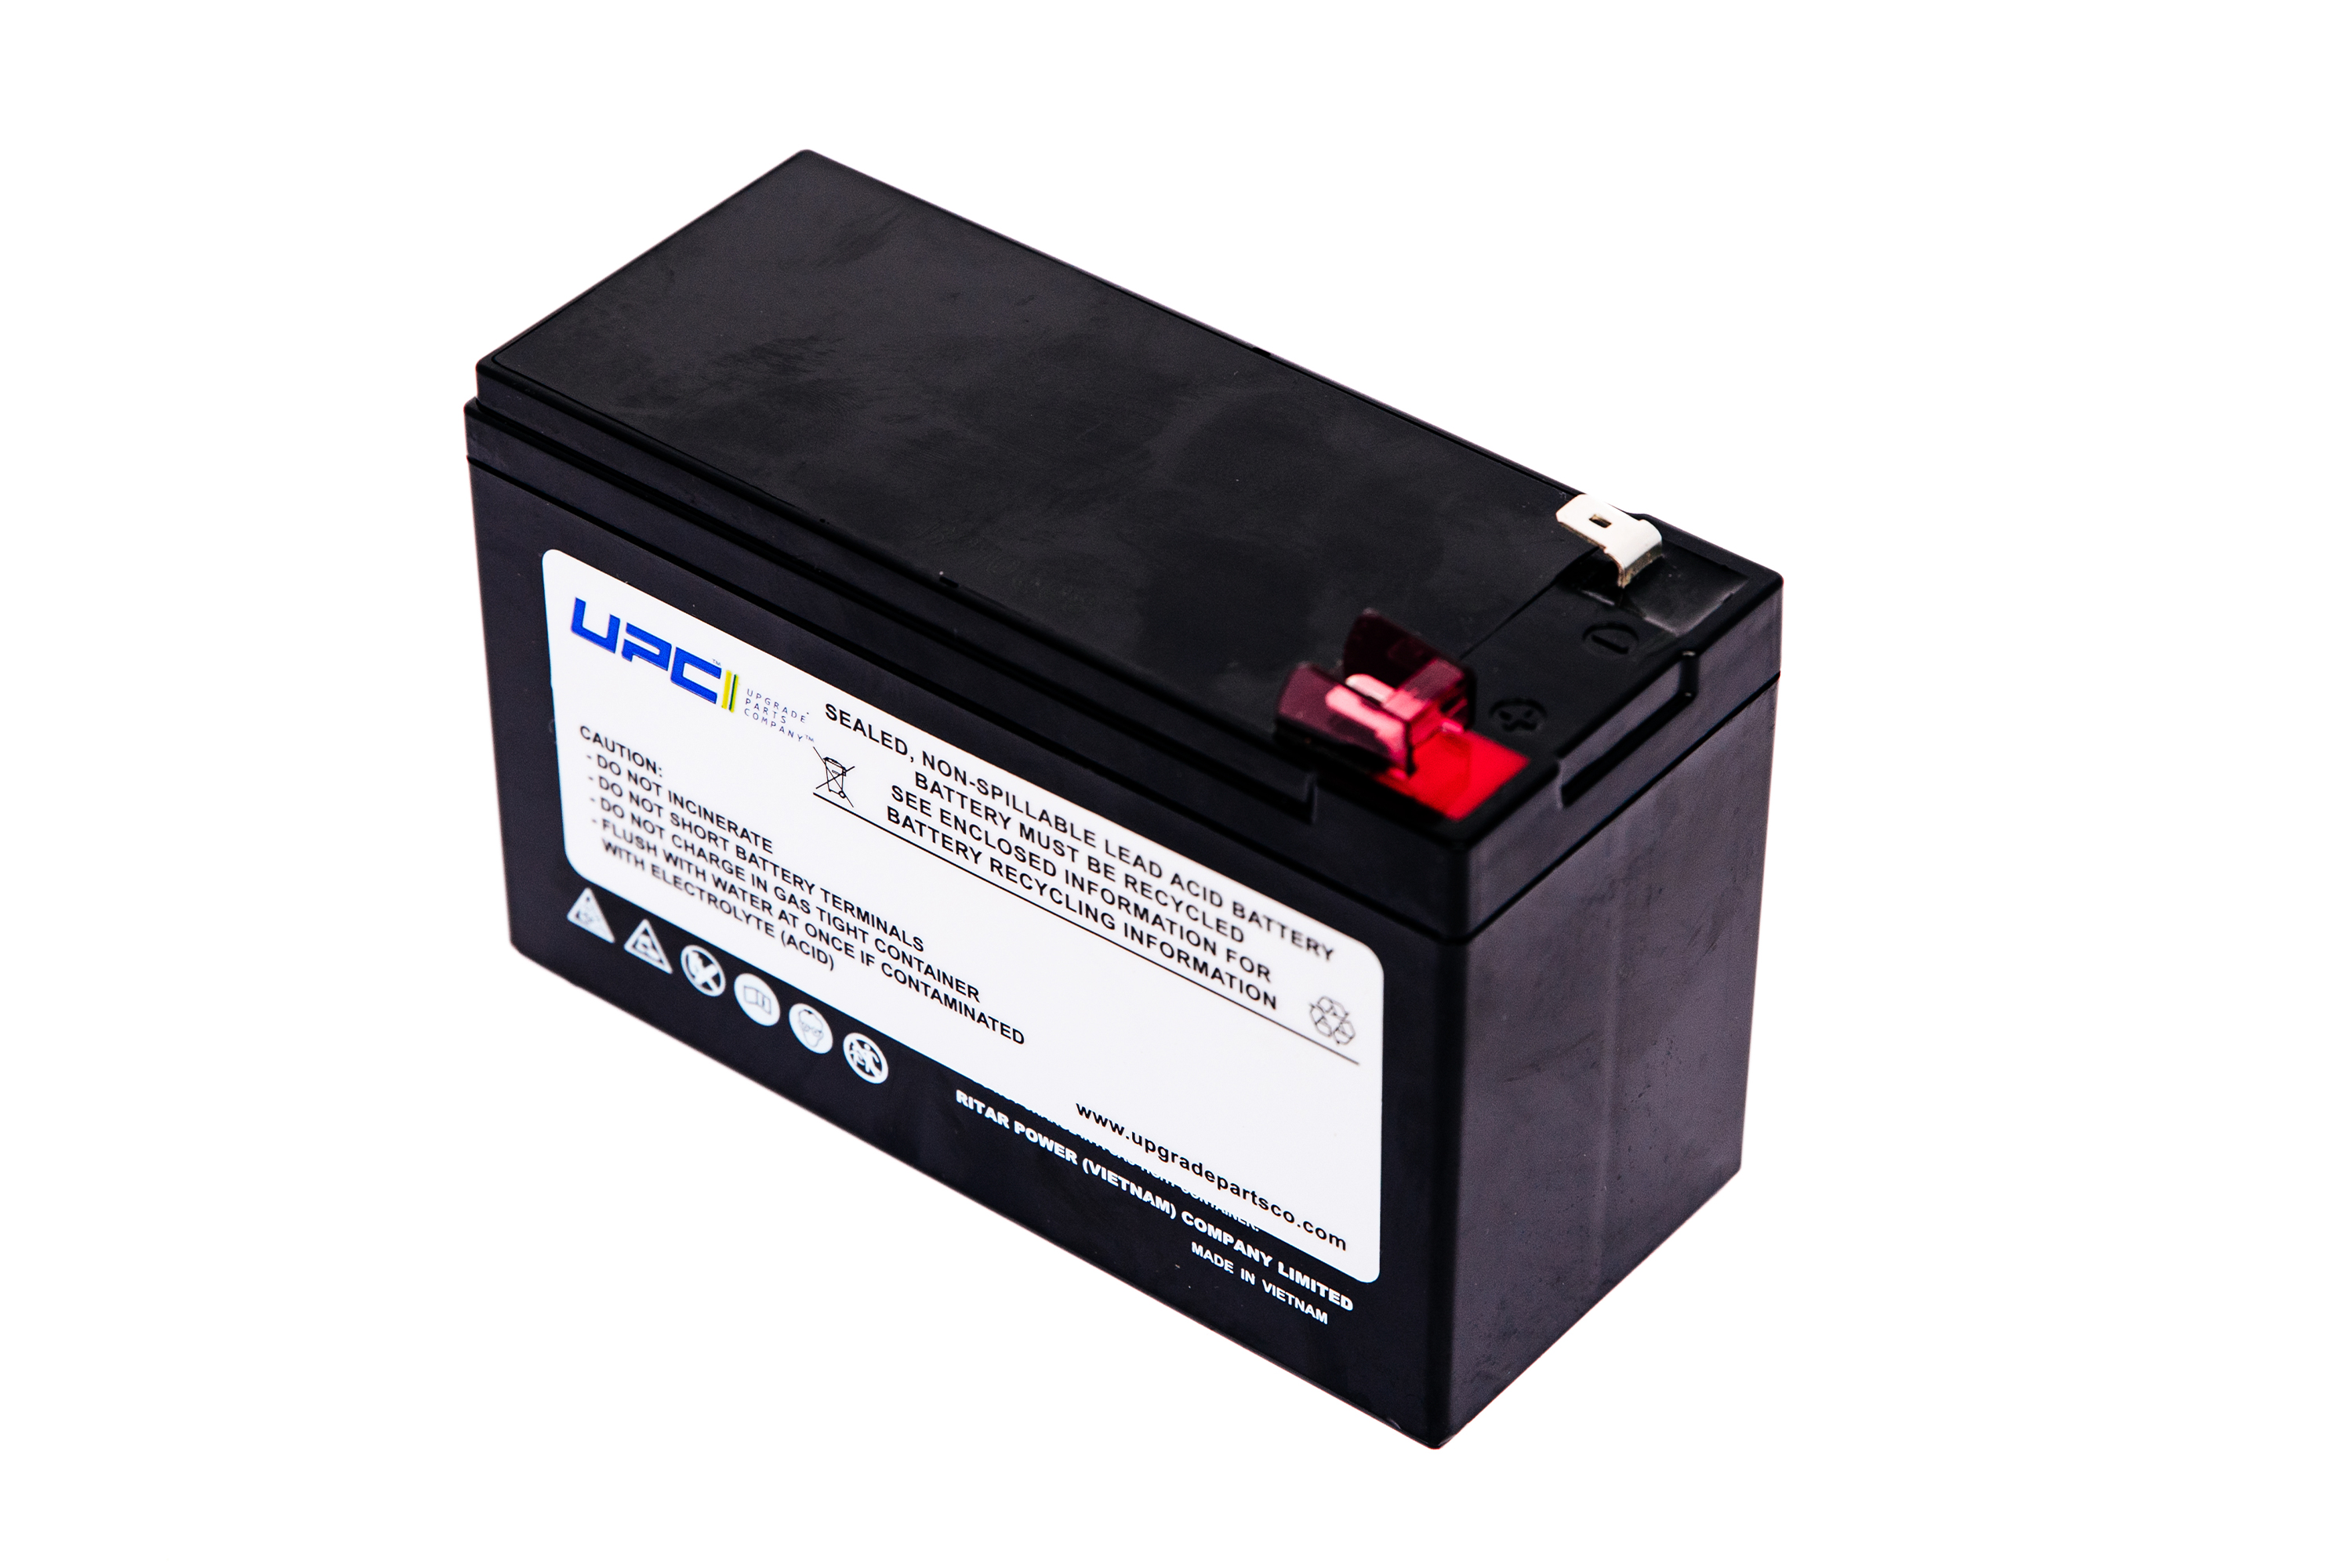 APCRBC114-UPC Replacement Battery for UPS Models BE450G, BN4001 - image 1 of 3